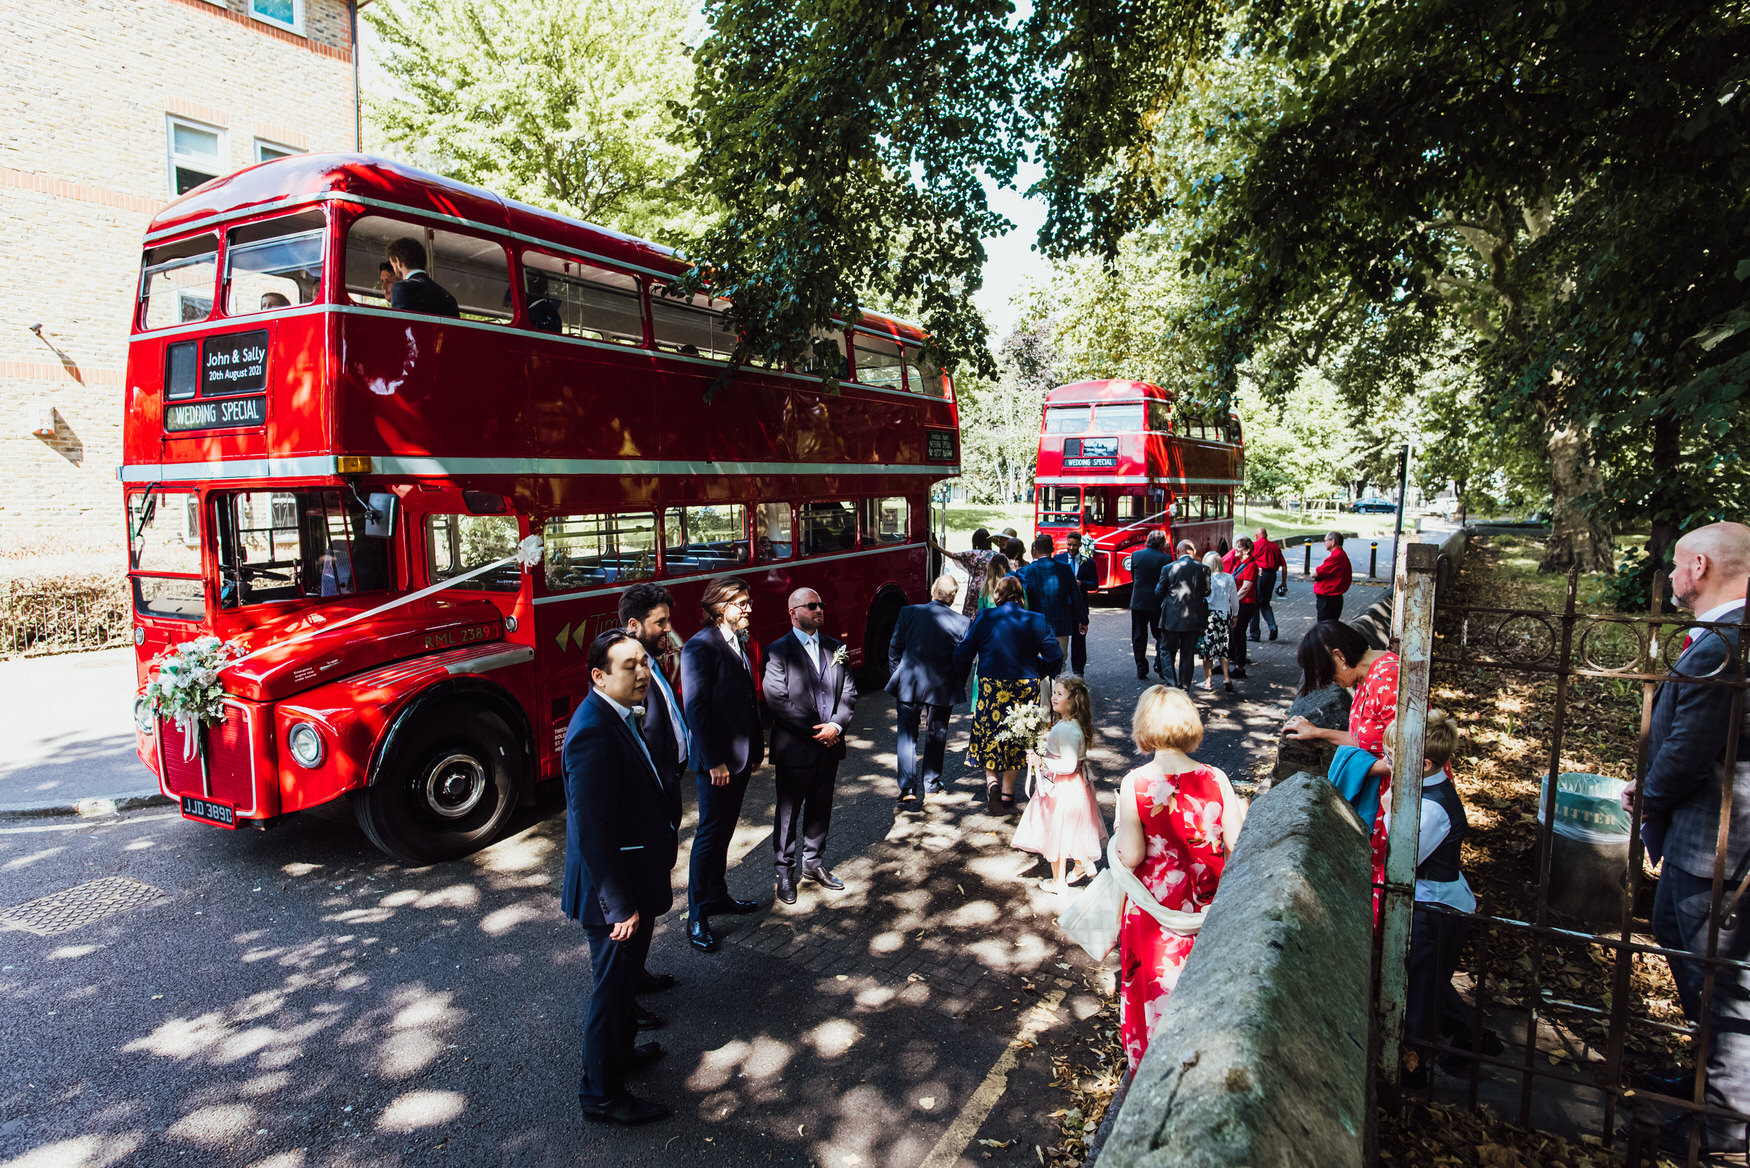 route master, red bus, london bus, wedding bus